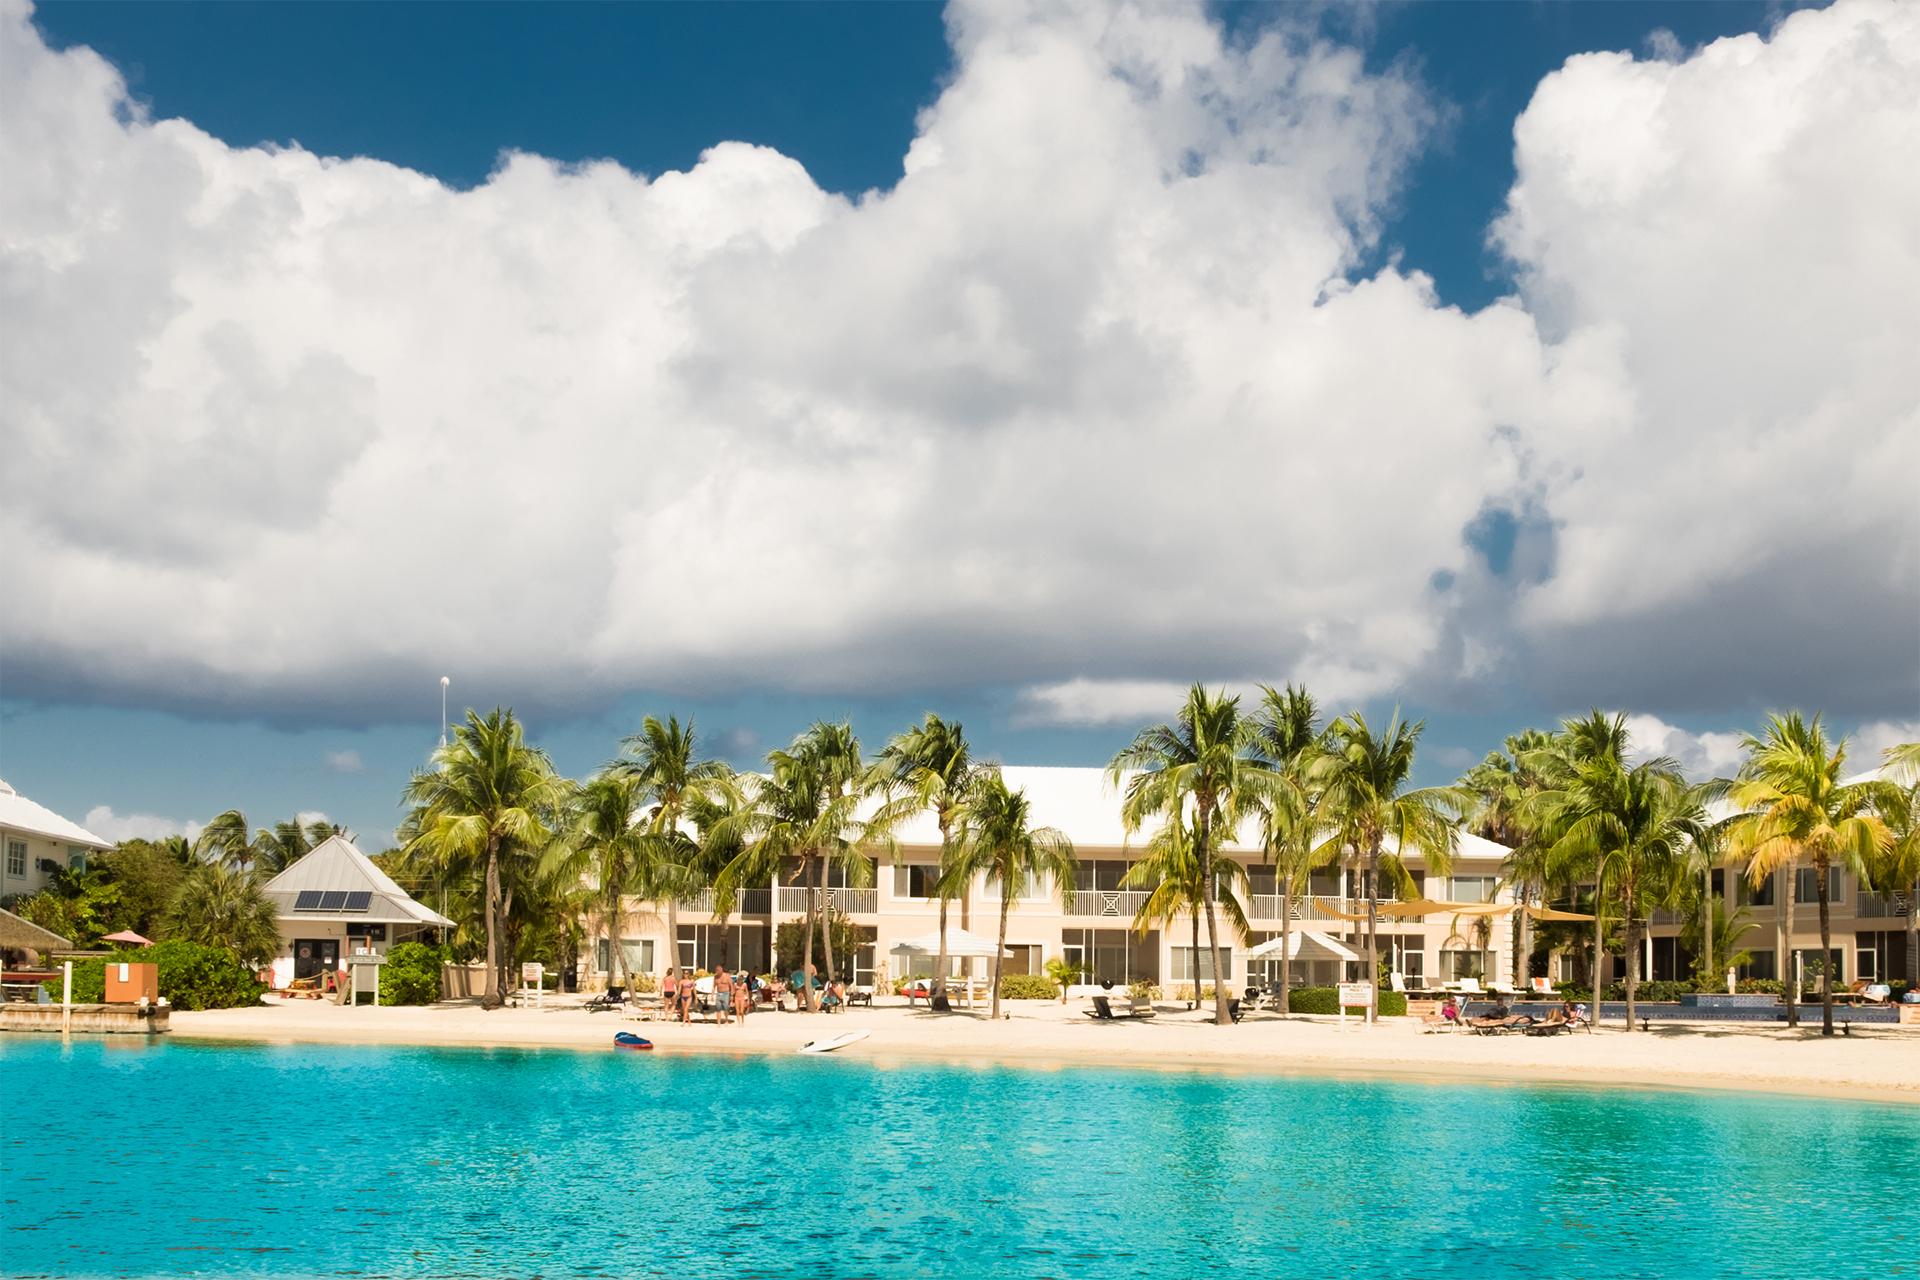 Ocean view resort with Cayman Islands vacation package